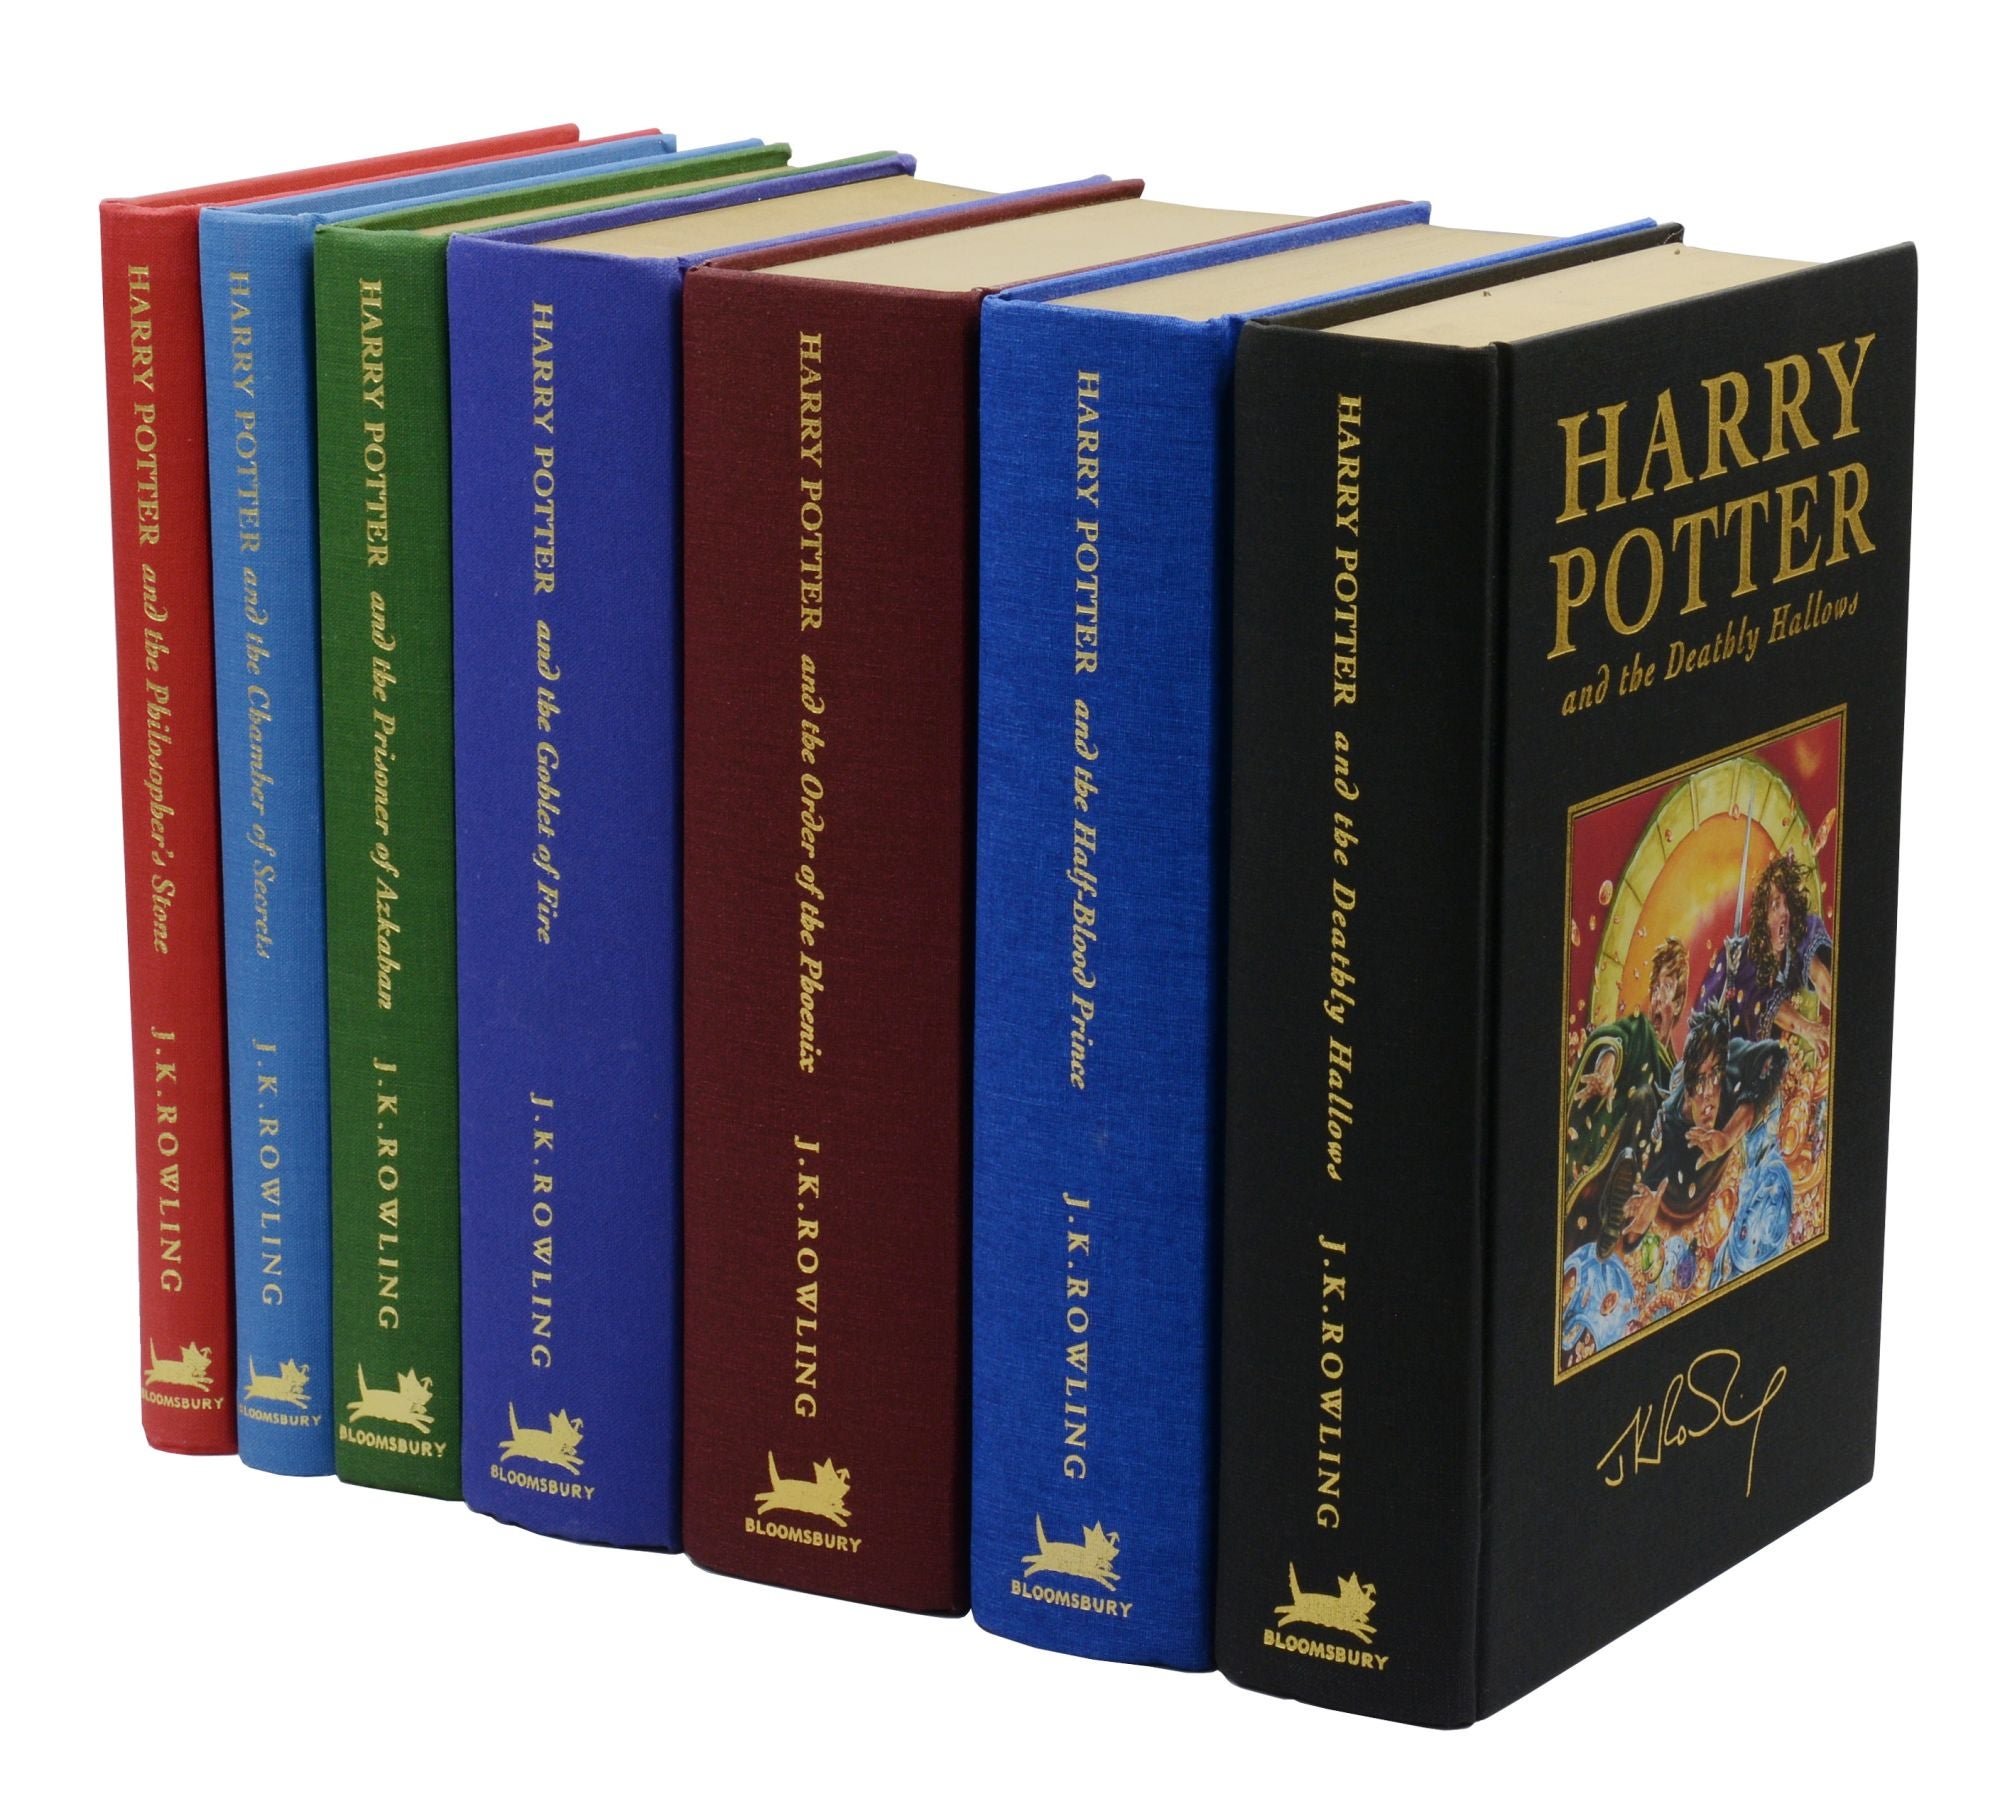 Harry Potter, complete set of the collector's deluxe editions:  Philosopher's Stone, Chamber of Secrets, Prisoner of Azkaban, Goblet of  Fire, Order of the Phoenix, Half-blood Prince, and Deathly Hallows